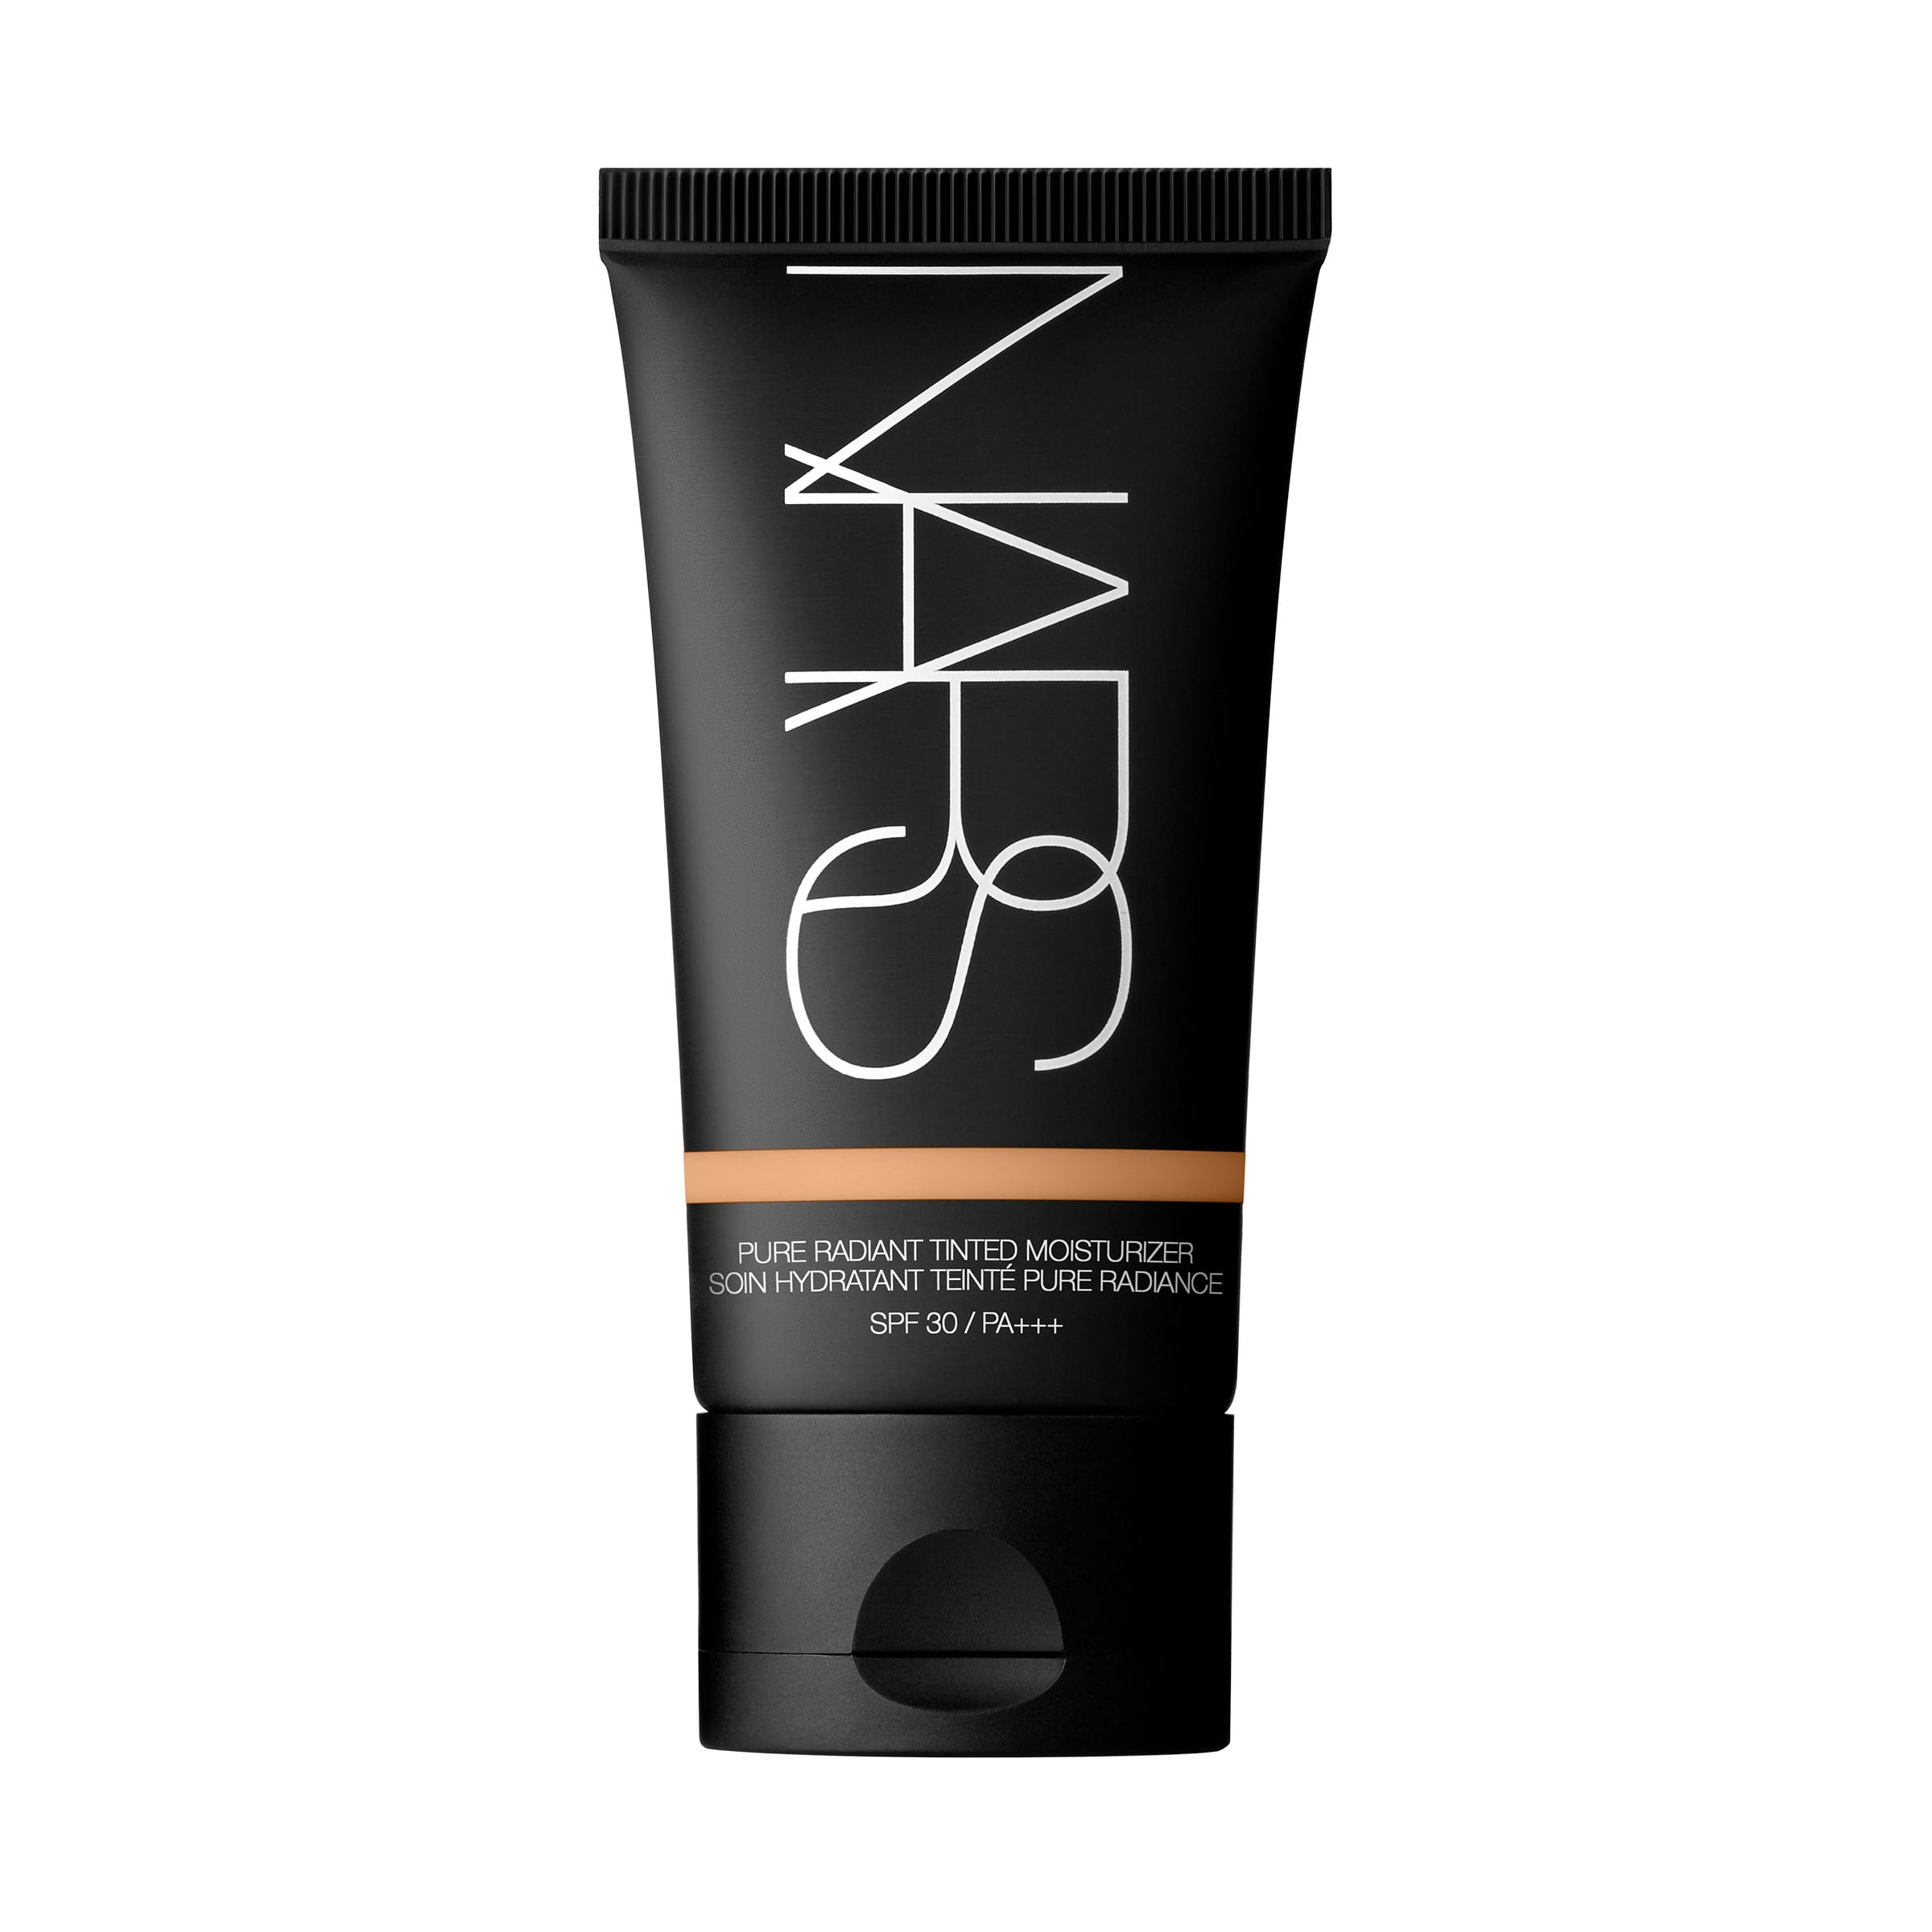 Nars Pure Radiant Tinted Moisturiser Spf 30/pa+++ In Neutral